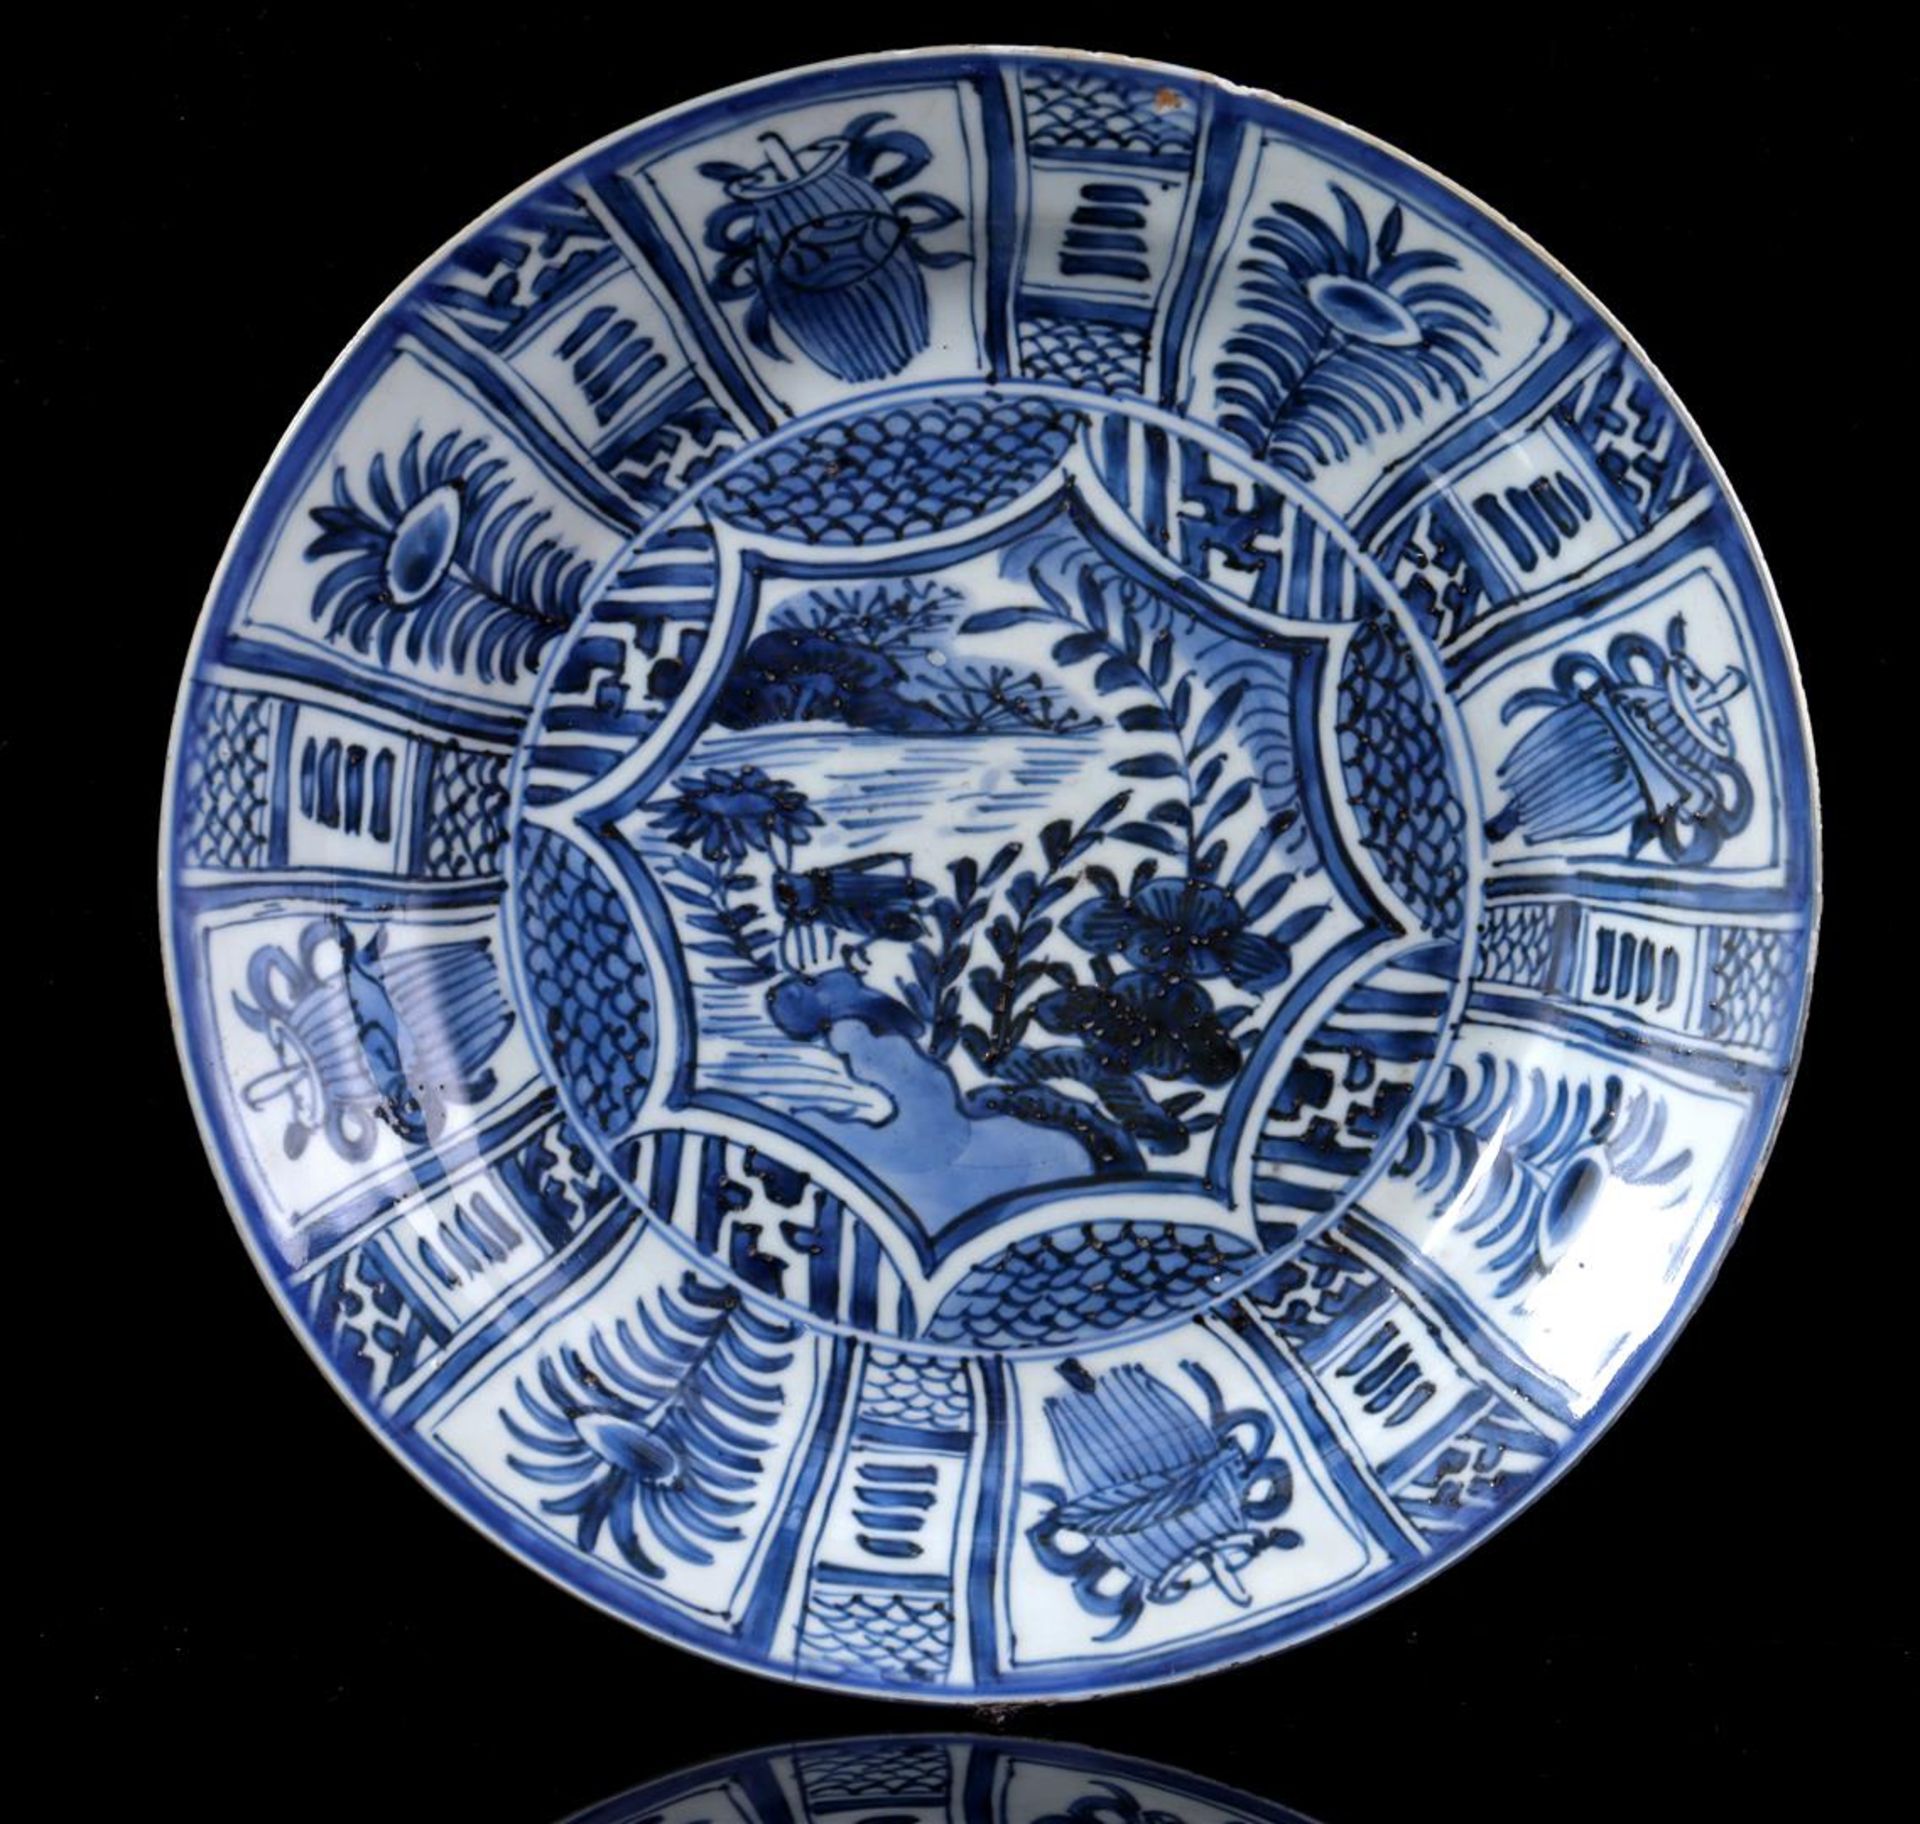 Porcelain dish with blue decor in Wanli style